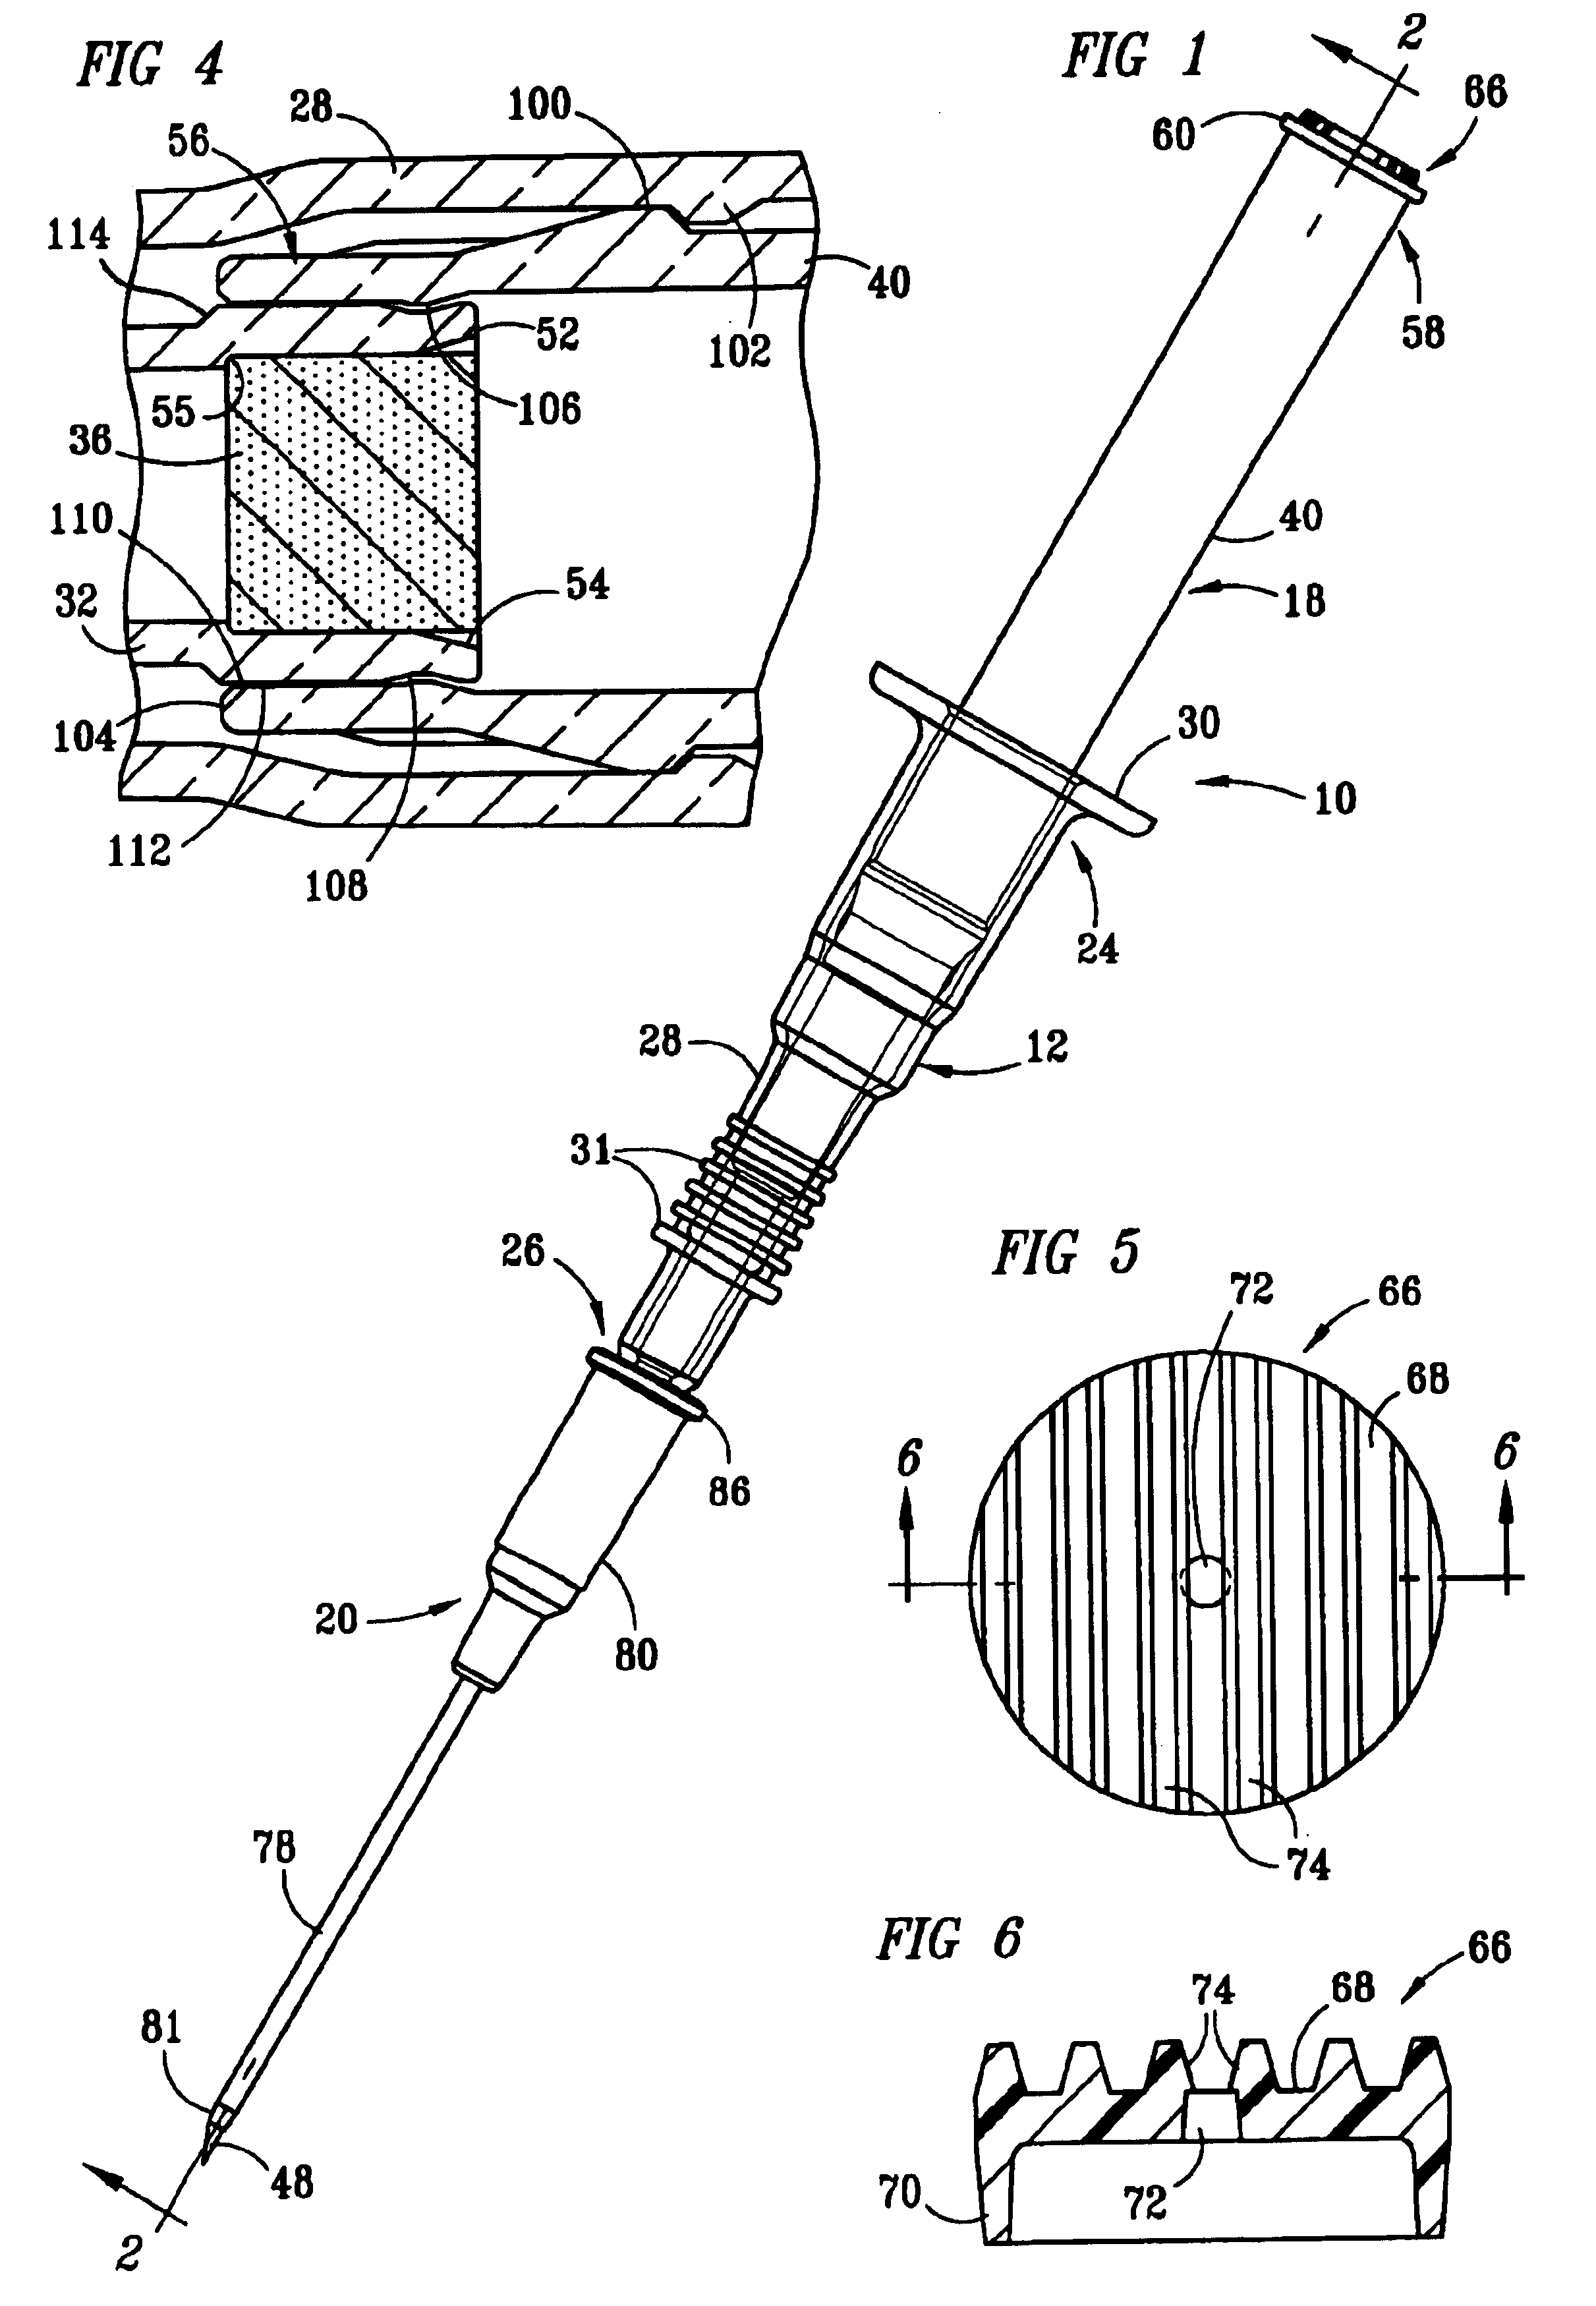 IV catheter introducer with retractable needle